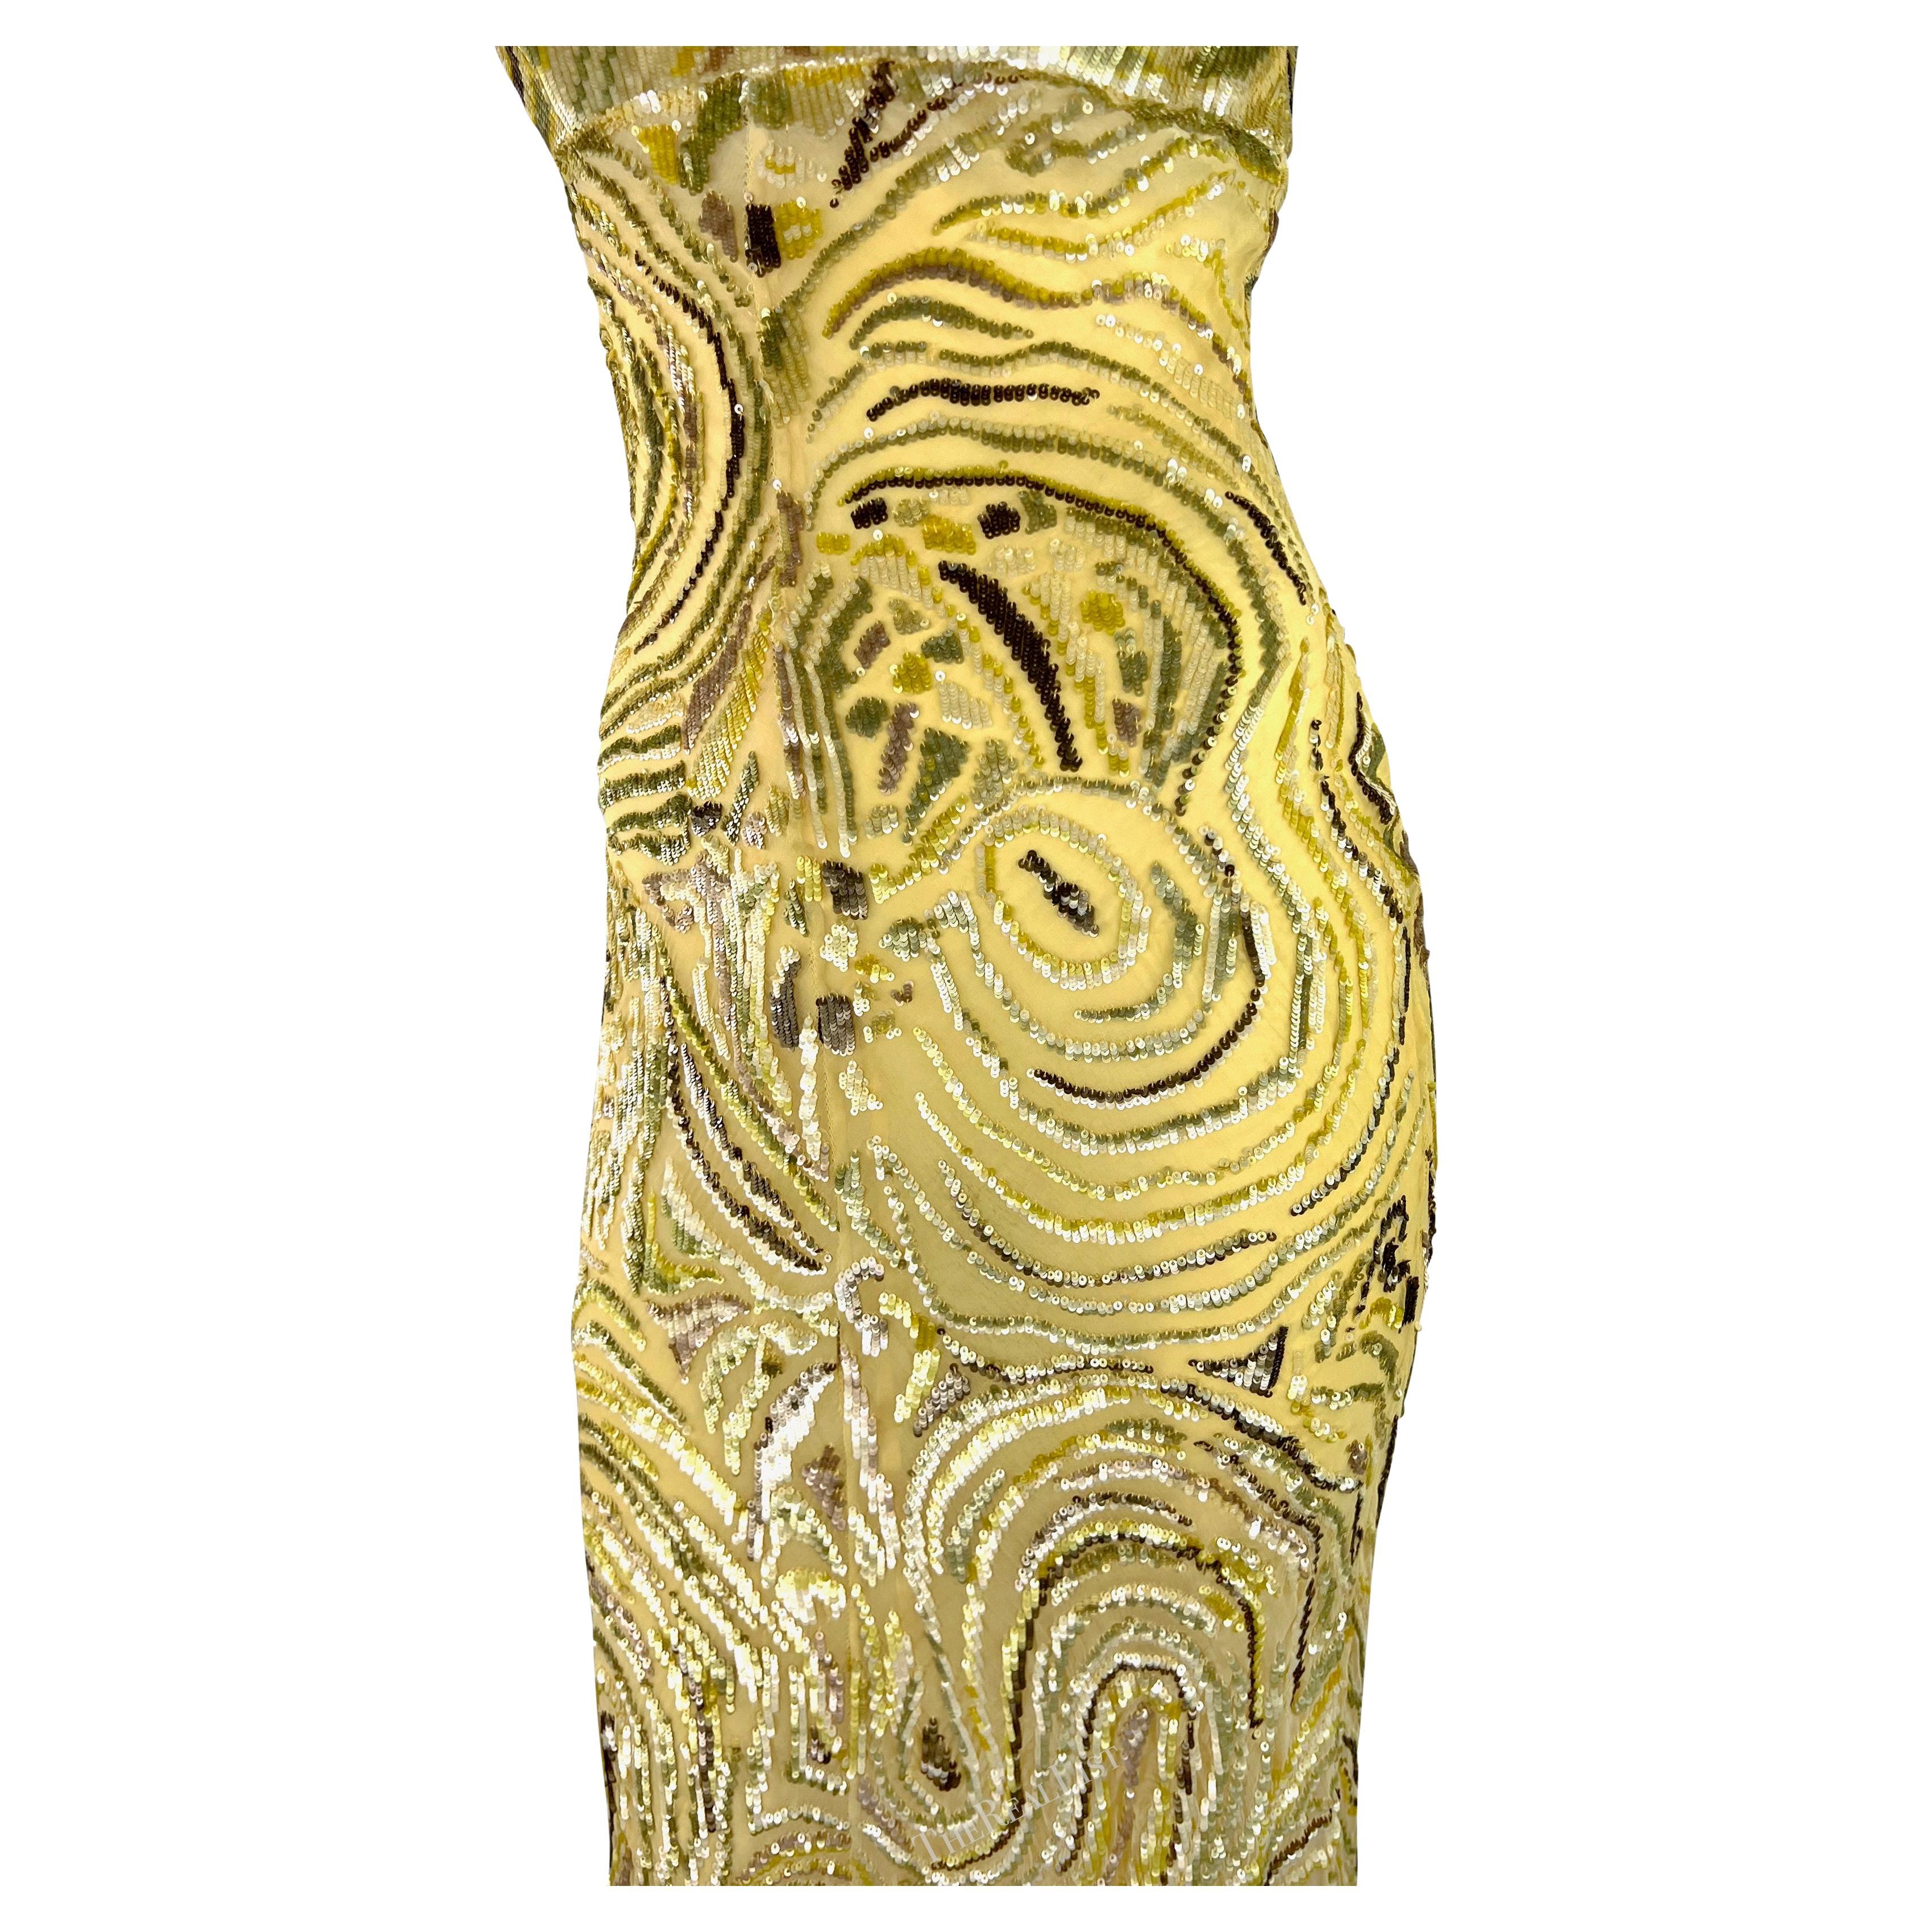 S/S 1997 Valentino Garavani Runway Naomi Abstract Organic Form Sequin Gown For Sale 11